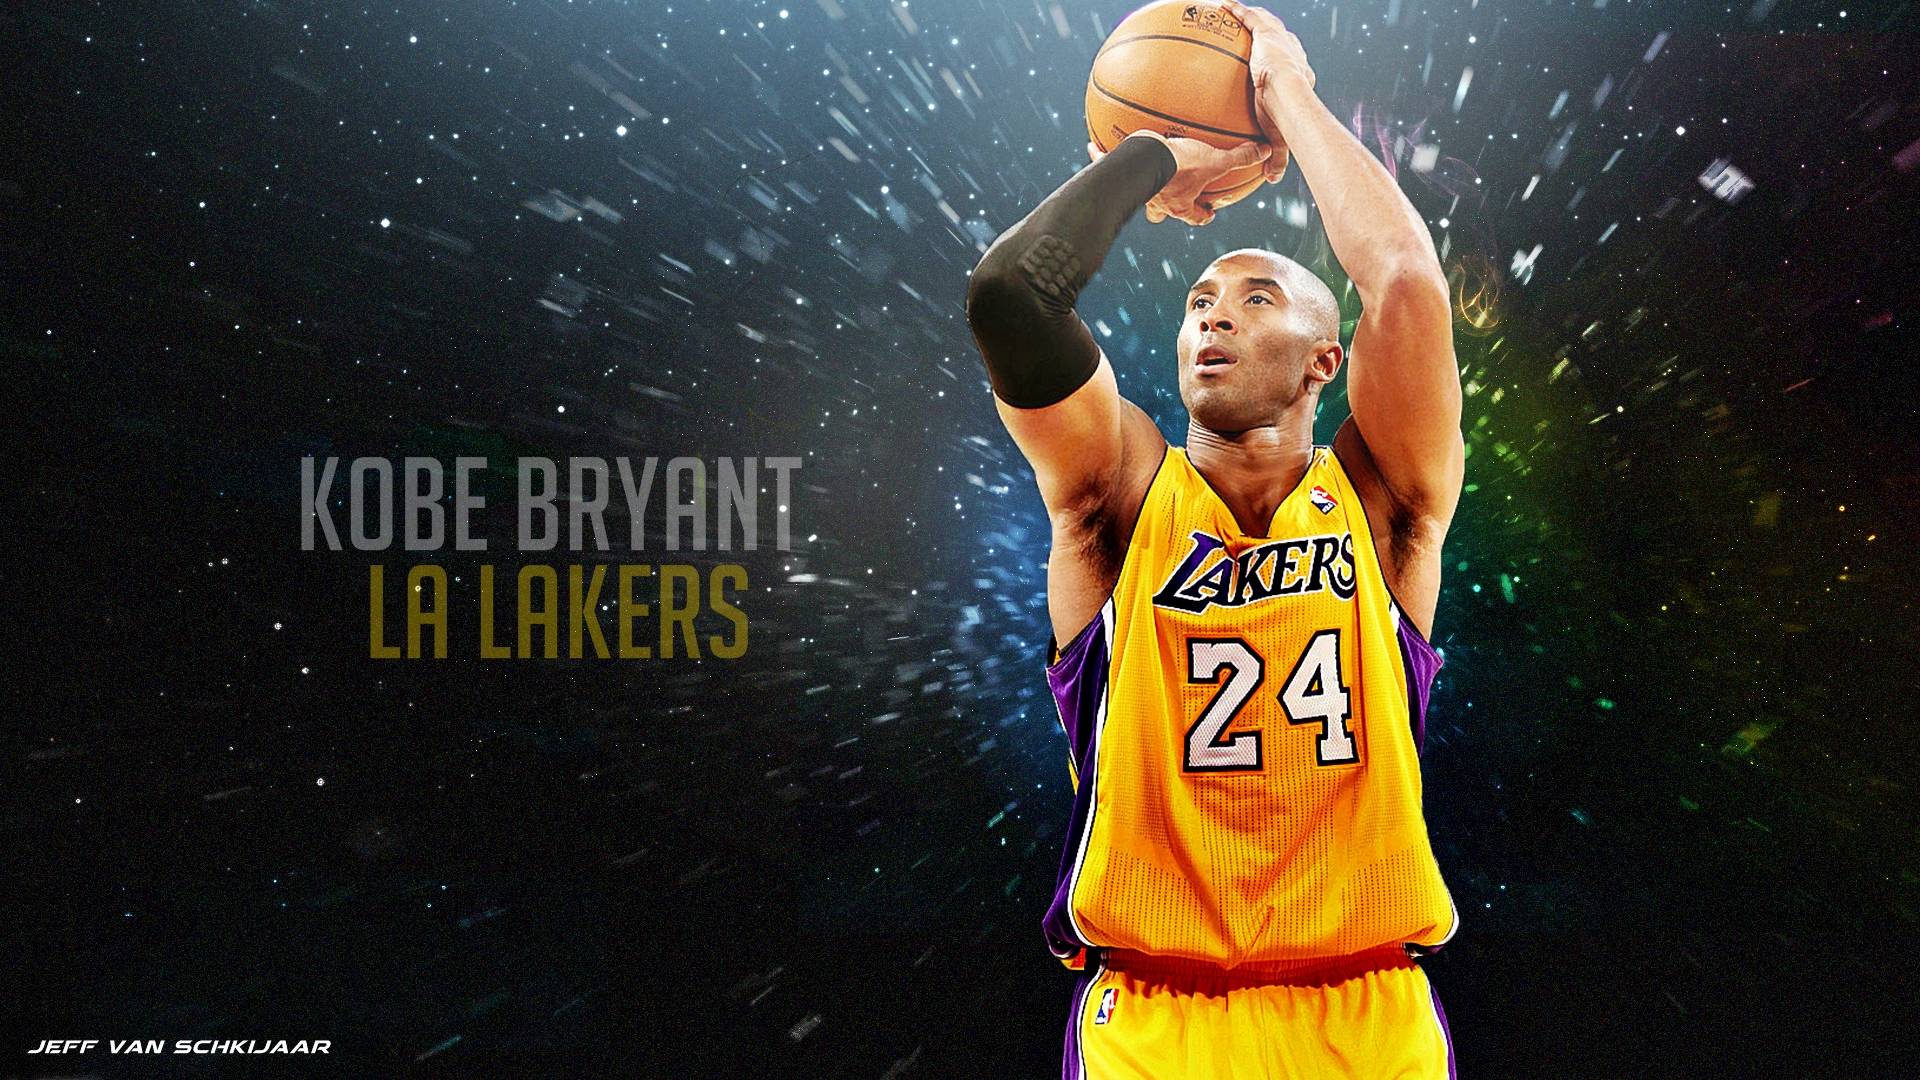 Download Kobe Bryant Pointing Cool Basketball Iphone Wallpaper